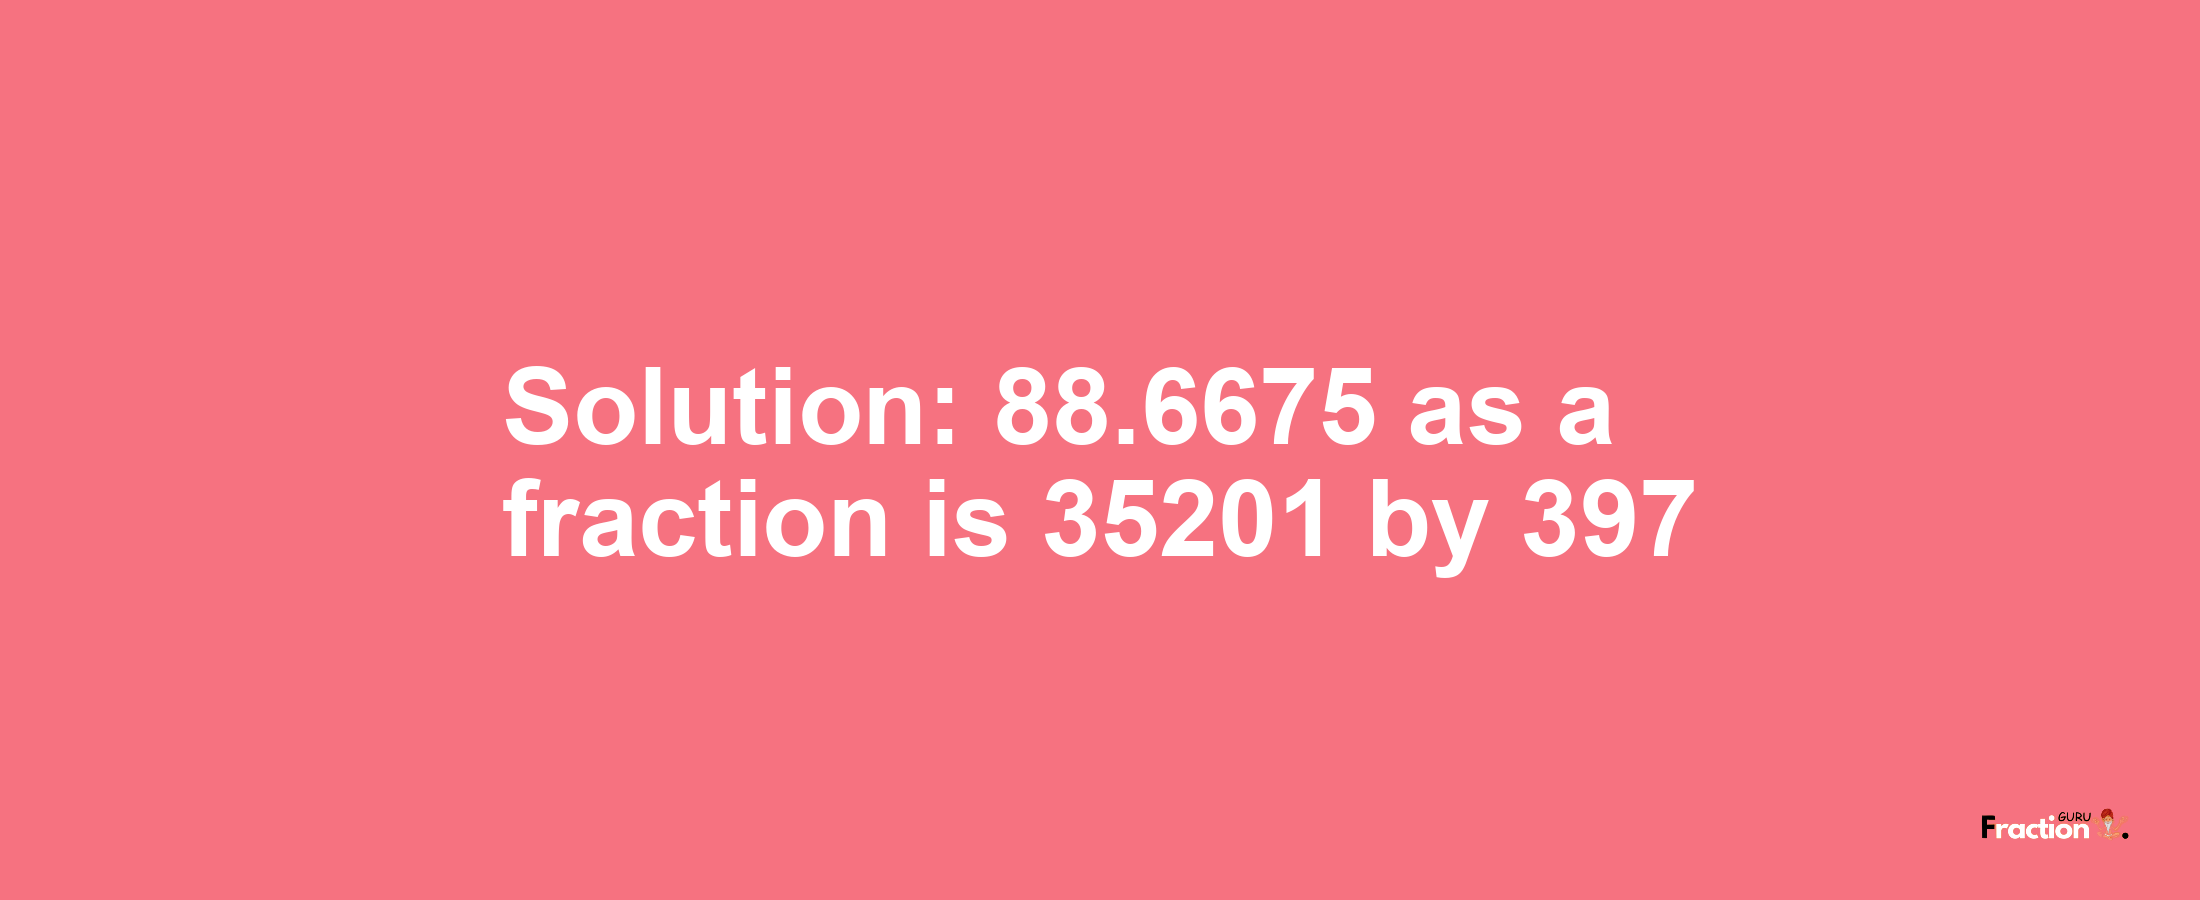 Solution:88.6675 as a fraction is 35201/397